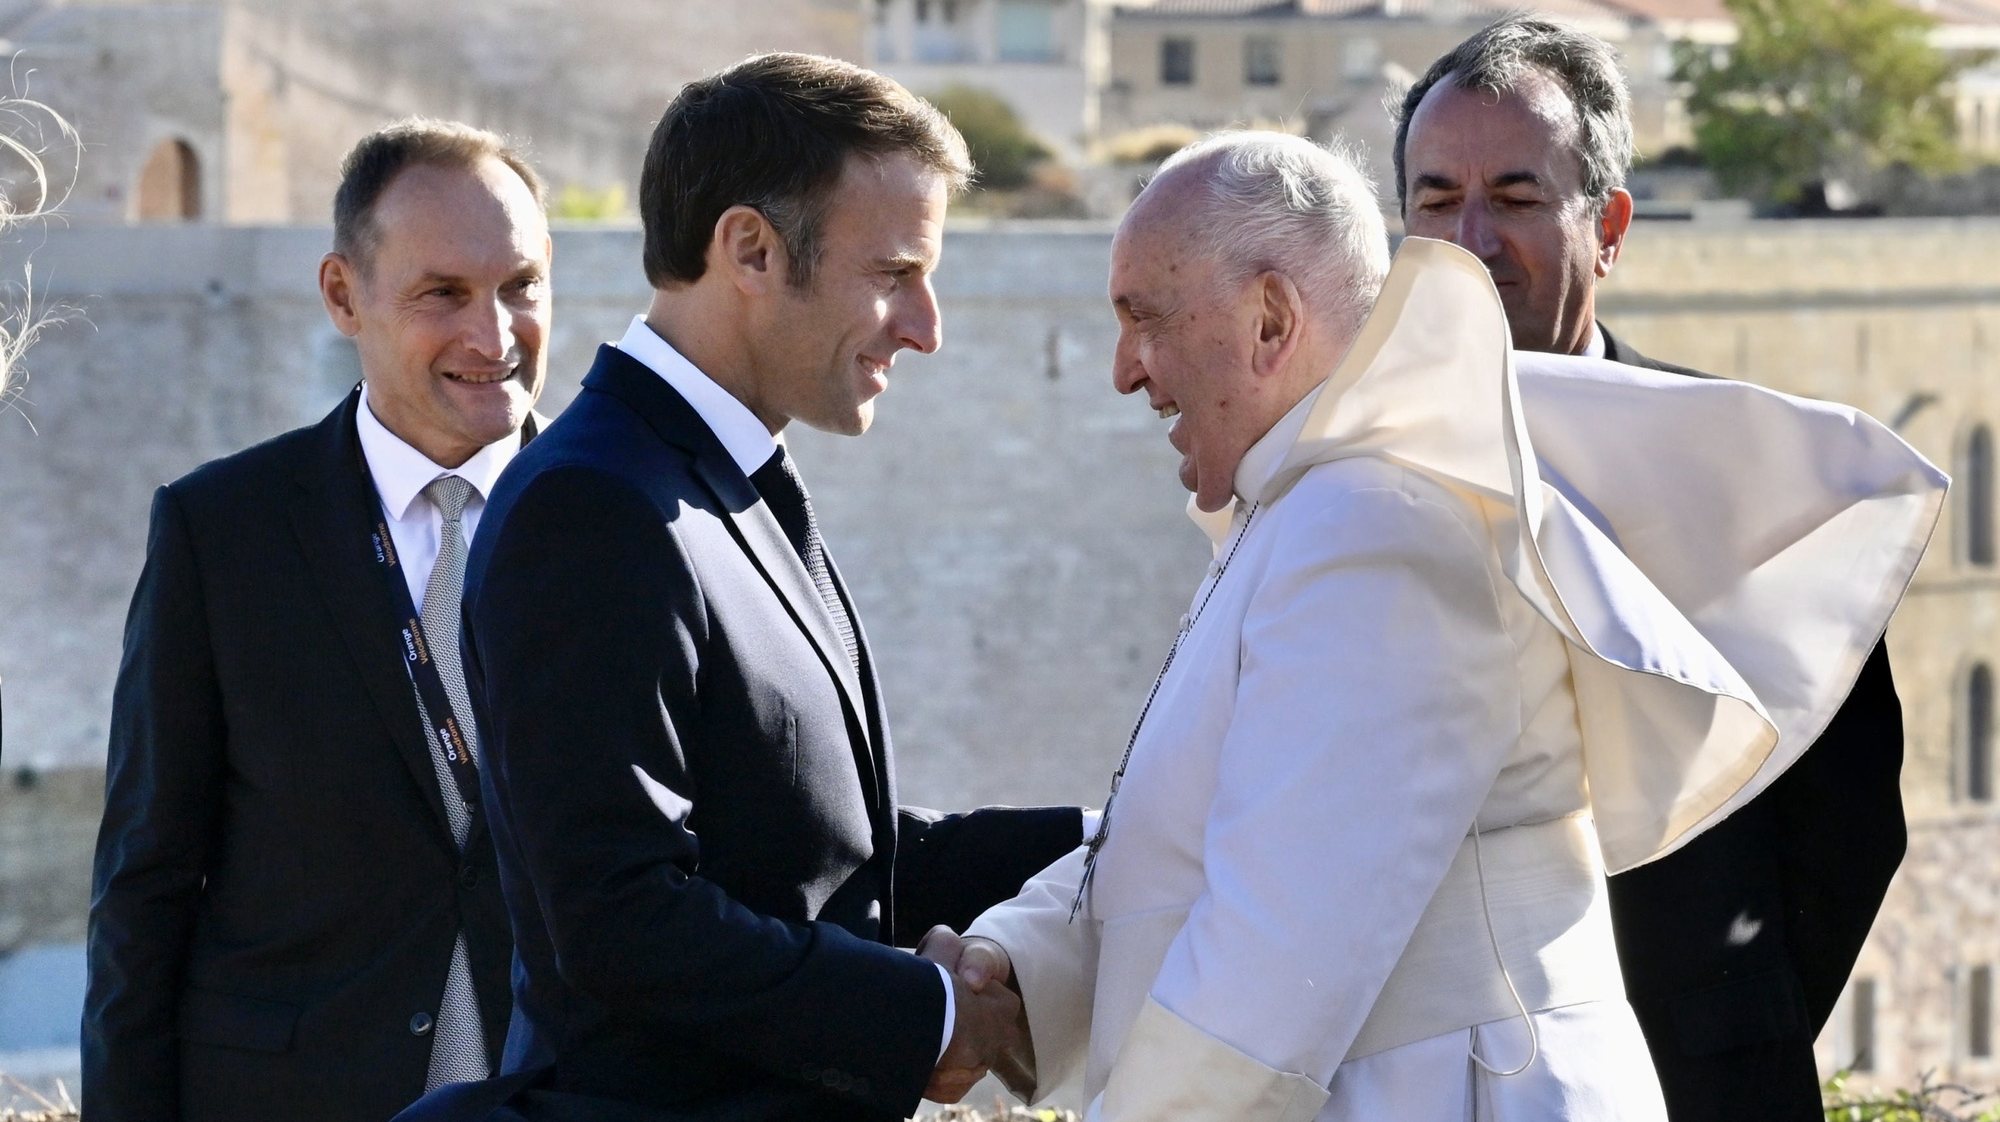 epa10878176 Pope Francis (R) is welcomed by the President of the French Republic Emmanuel Macron (L) upon his arrival for the final session of the Mediterranean Meetings, at the Palais du Pharo in Marseille, France, 23 September 2023. On the occasion of his apostolic journey in Marseille, Pope Francis will attend the conclusion of the Mediterranean Meetings that are held from 22 to 23 September.  EPA/ALESSANDRO DI MEO